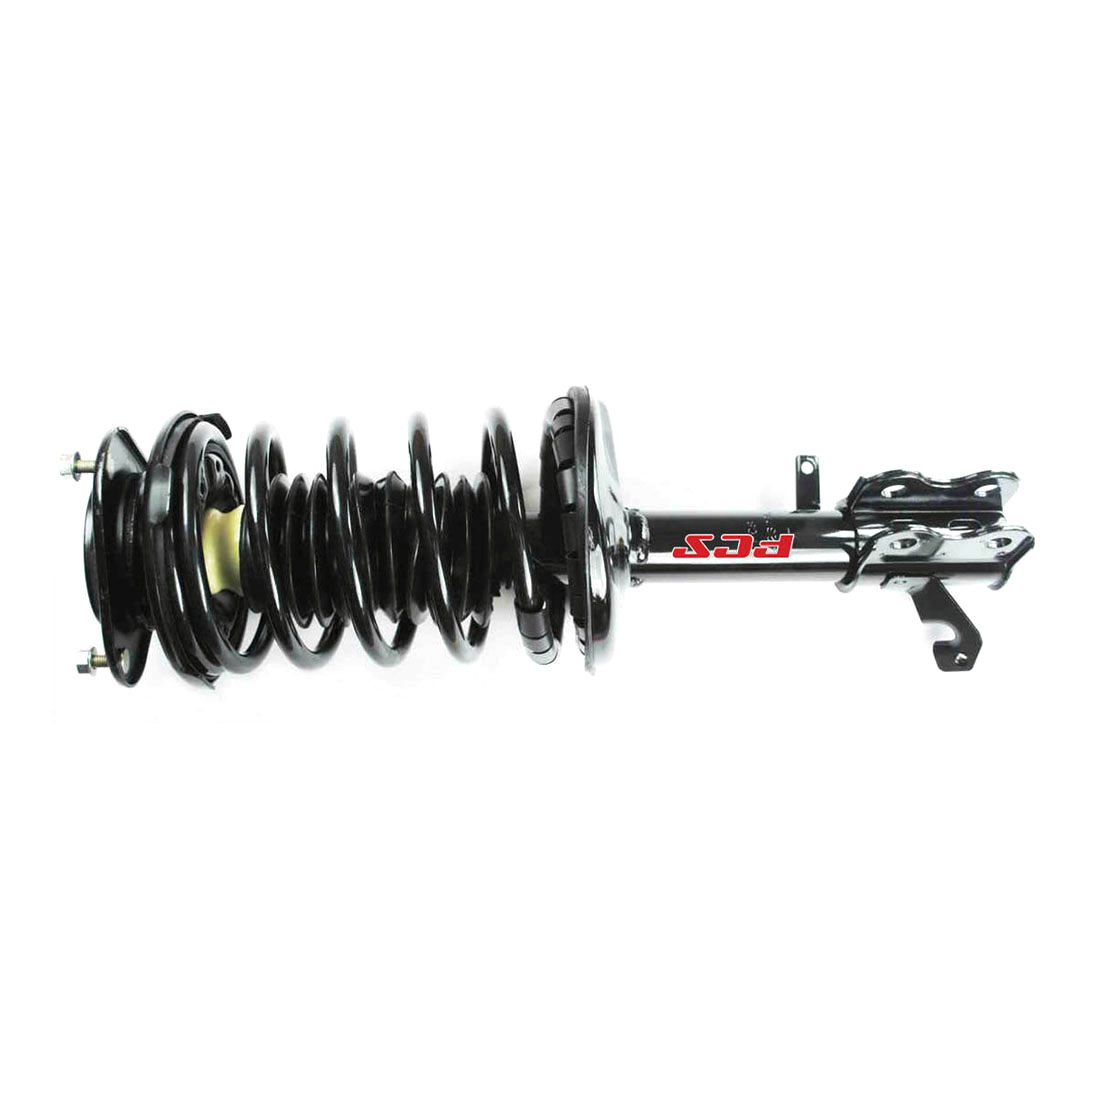 FCS Shocks And Struts Assembly Complete Coil Spring Suspension For Chevrolet Prizm 1998 1999 2000 2001 2002 For Toyota Corolla 1993 1994 1995 1996 1997 1998 1999 2000 2001 2002 - image 3 of 9